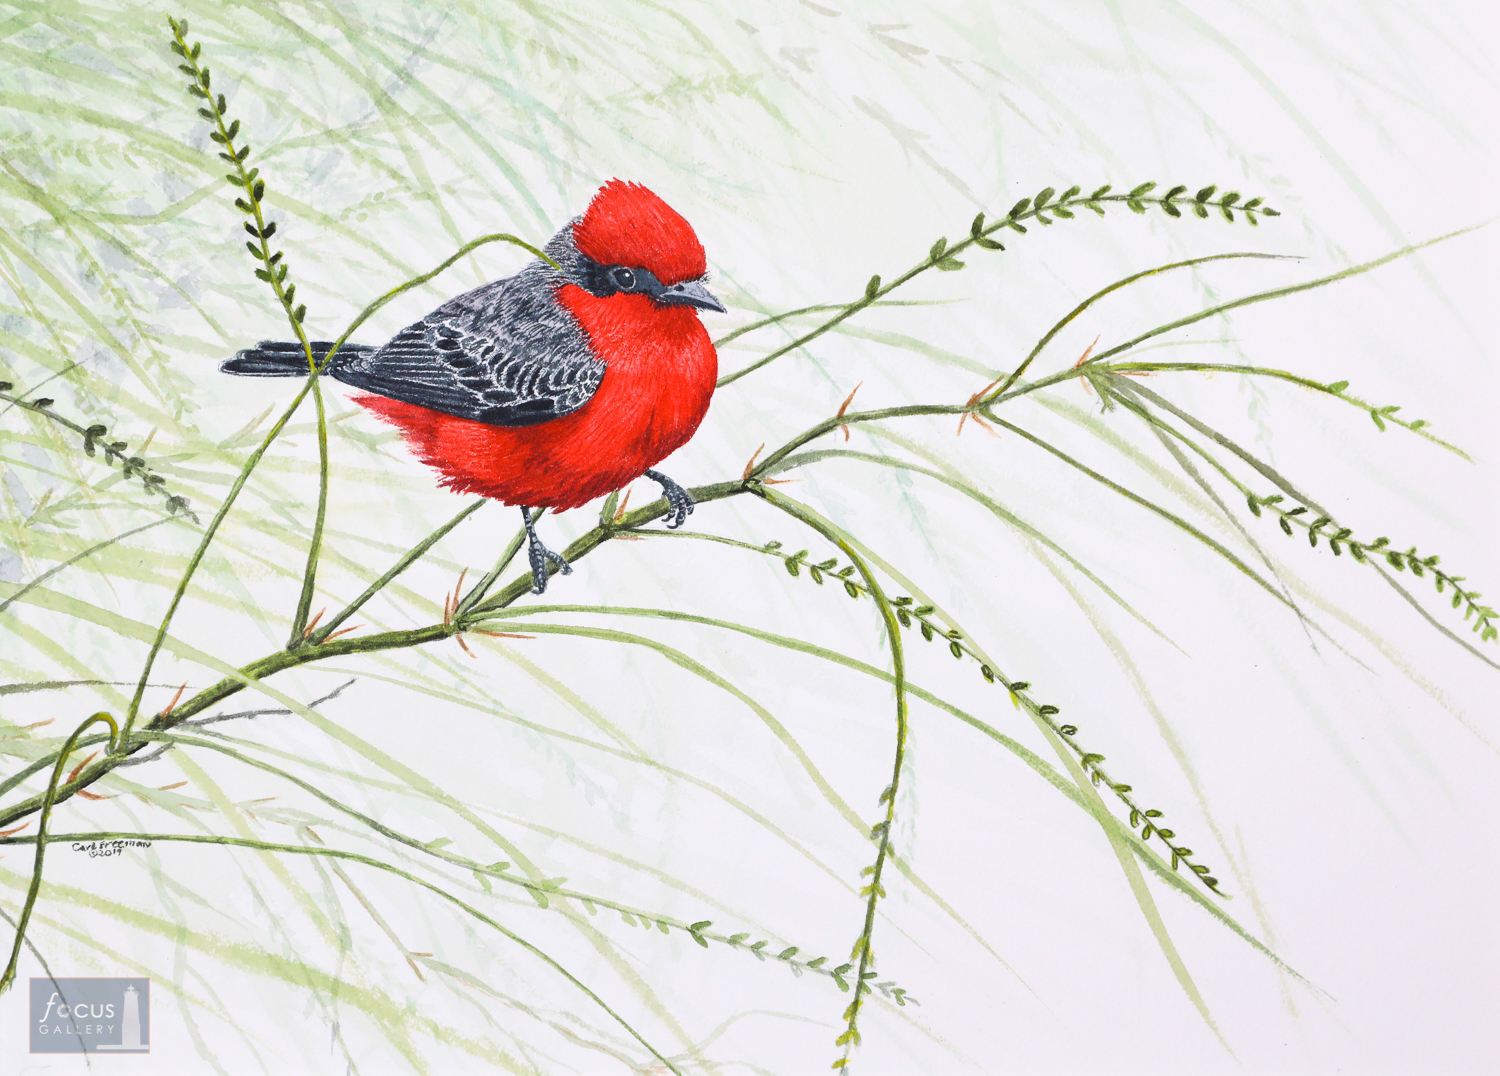 Original watercolor painting of a Vermillion Flycatcher bird perched on a branch.